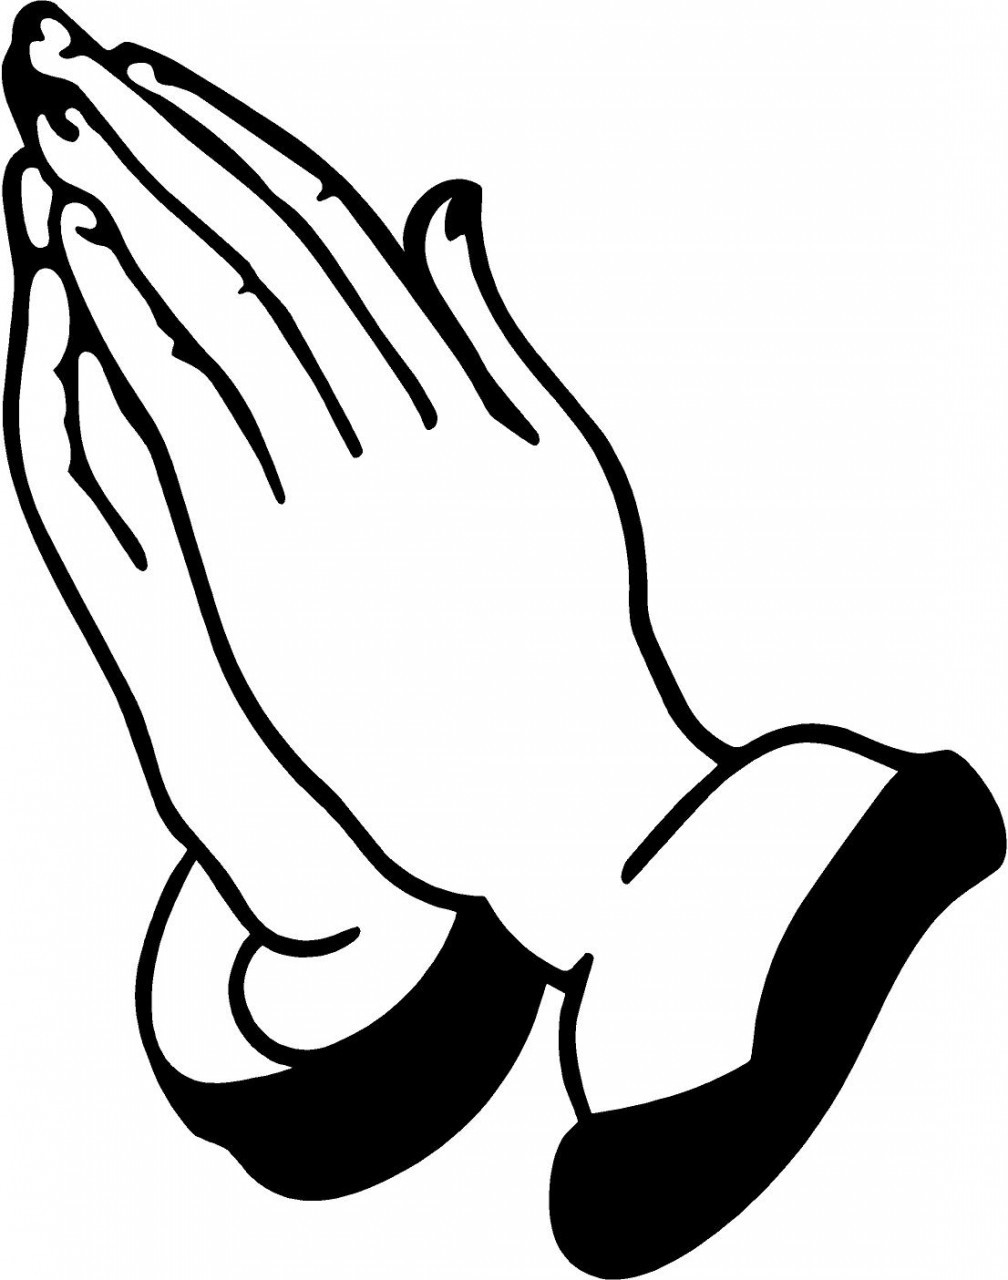 Free Black And White Praying Hands, Download Free Clip Art.